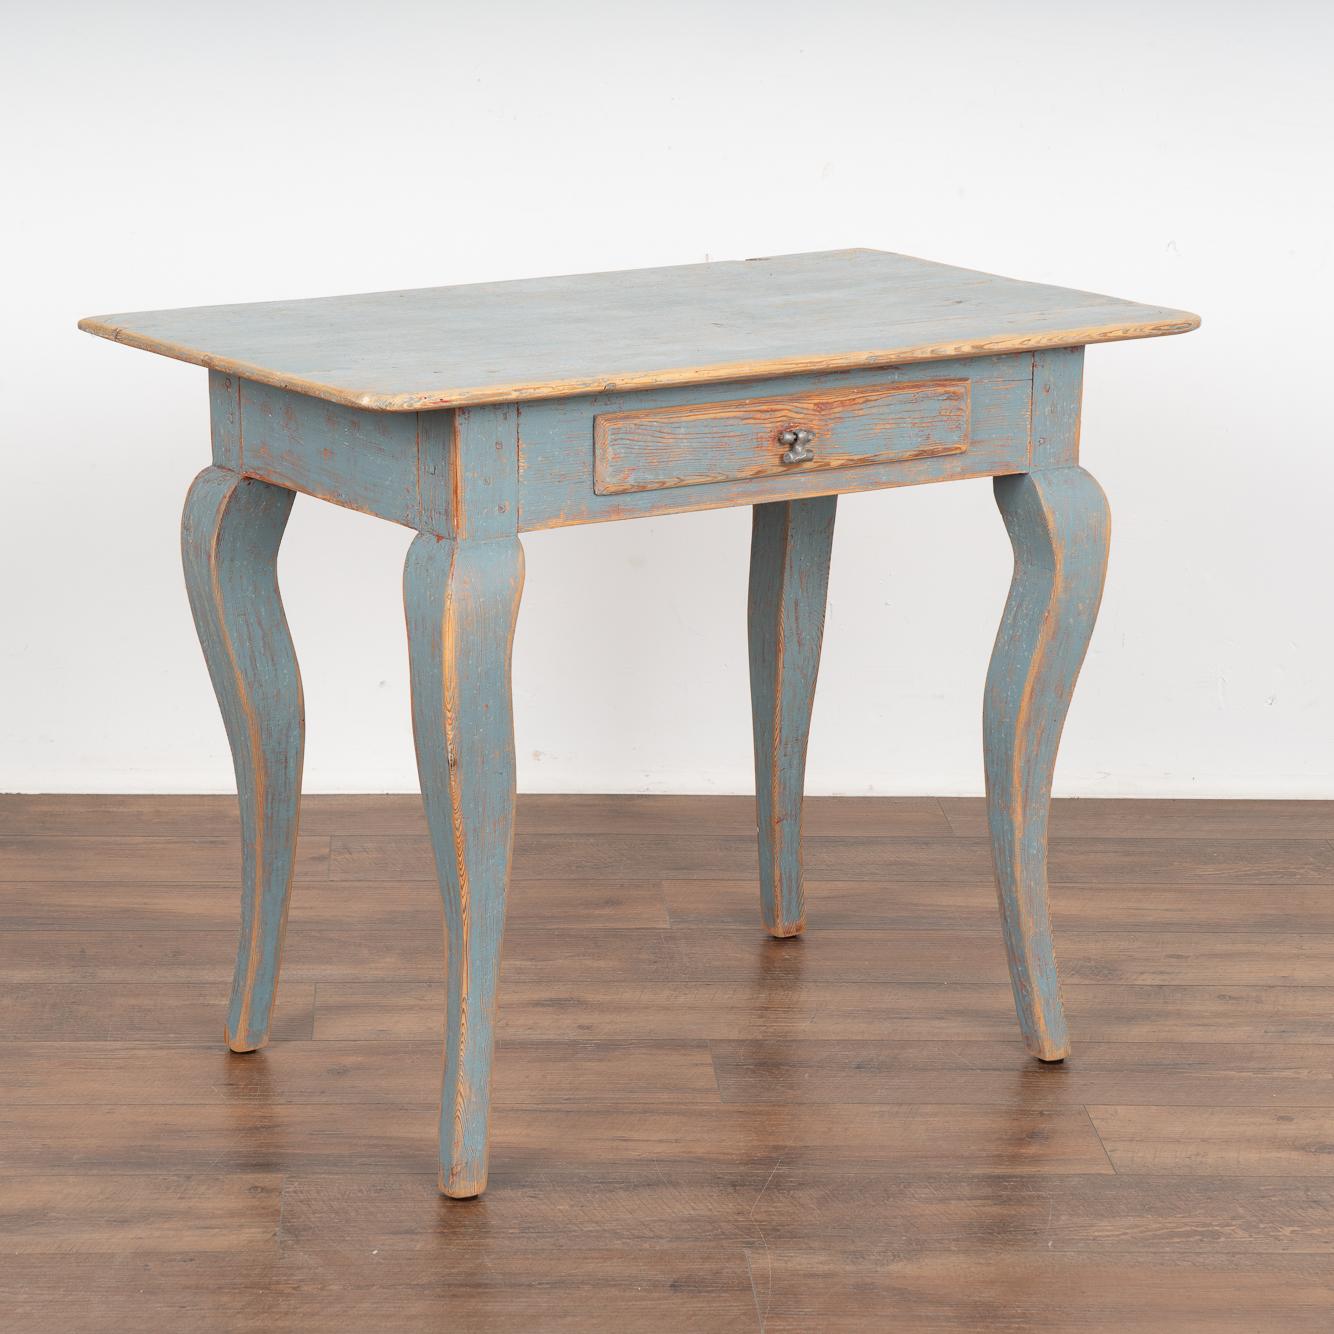 The curved cabriolet legs add a charming touch to this pine side table with single drawer from the Swedish countryside.
The newer, professionally applied blue painted finish has been lightly distressed revealing the natural pine and a trace of old